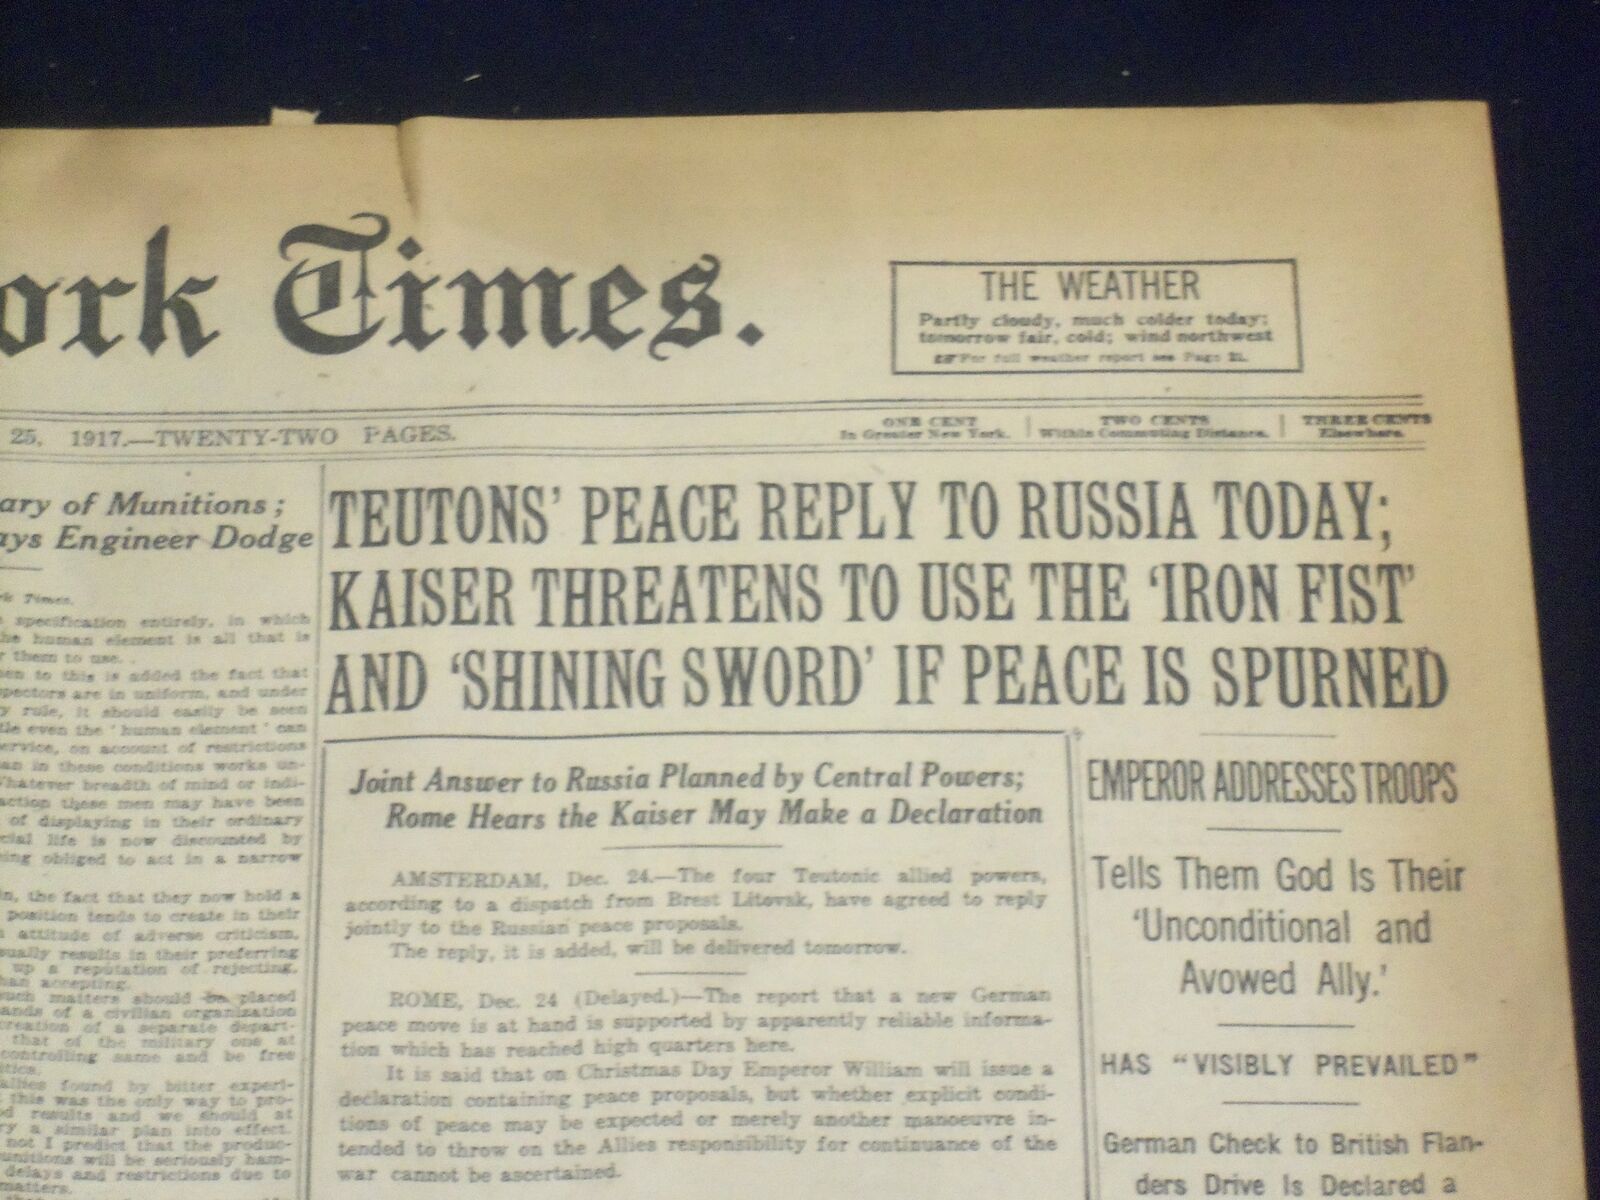 1917 DECEMBER 25 NEW YORK TIMES - TEUTONS PEACE REPLY TO RUSSIA TODAY - NT 8267